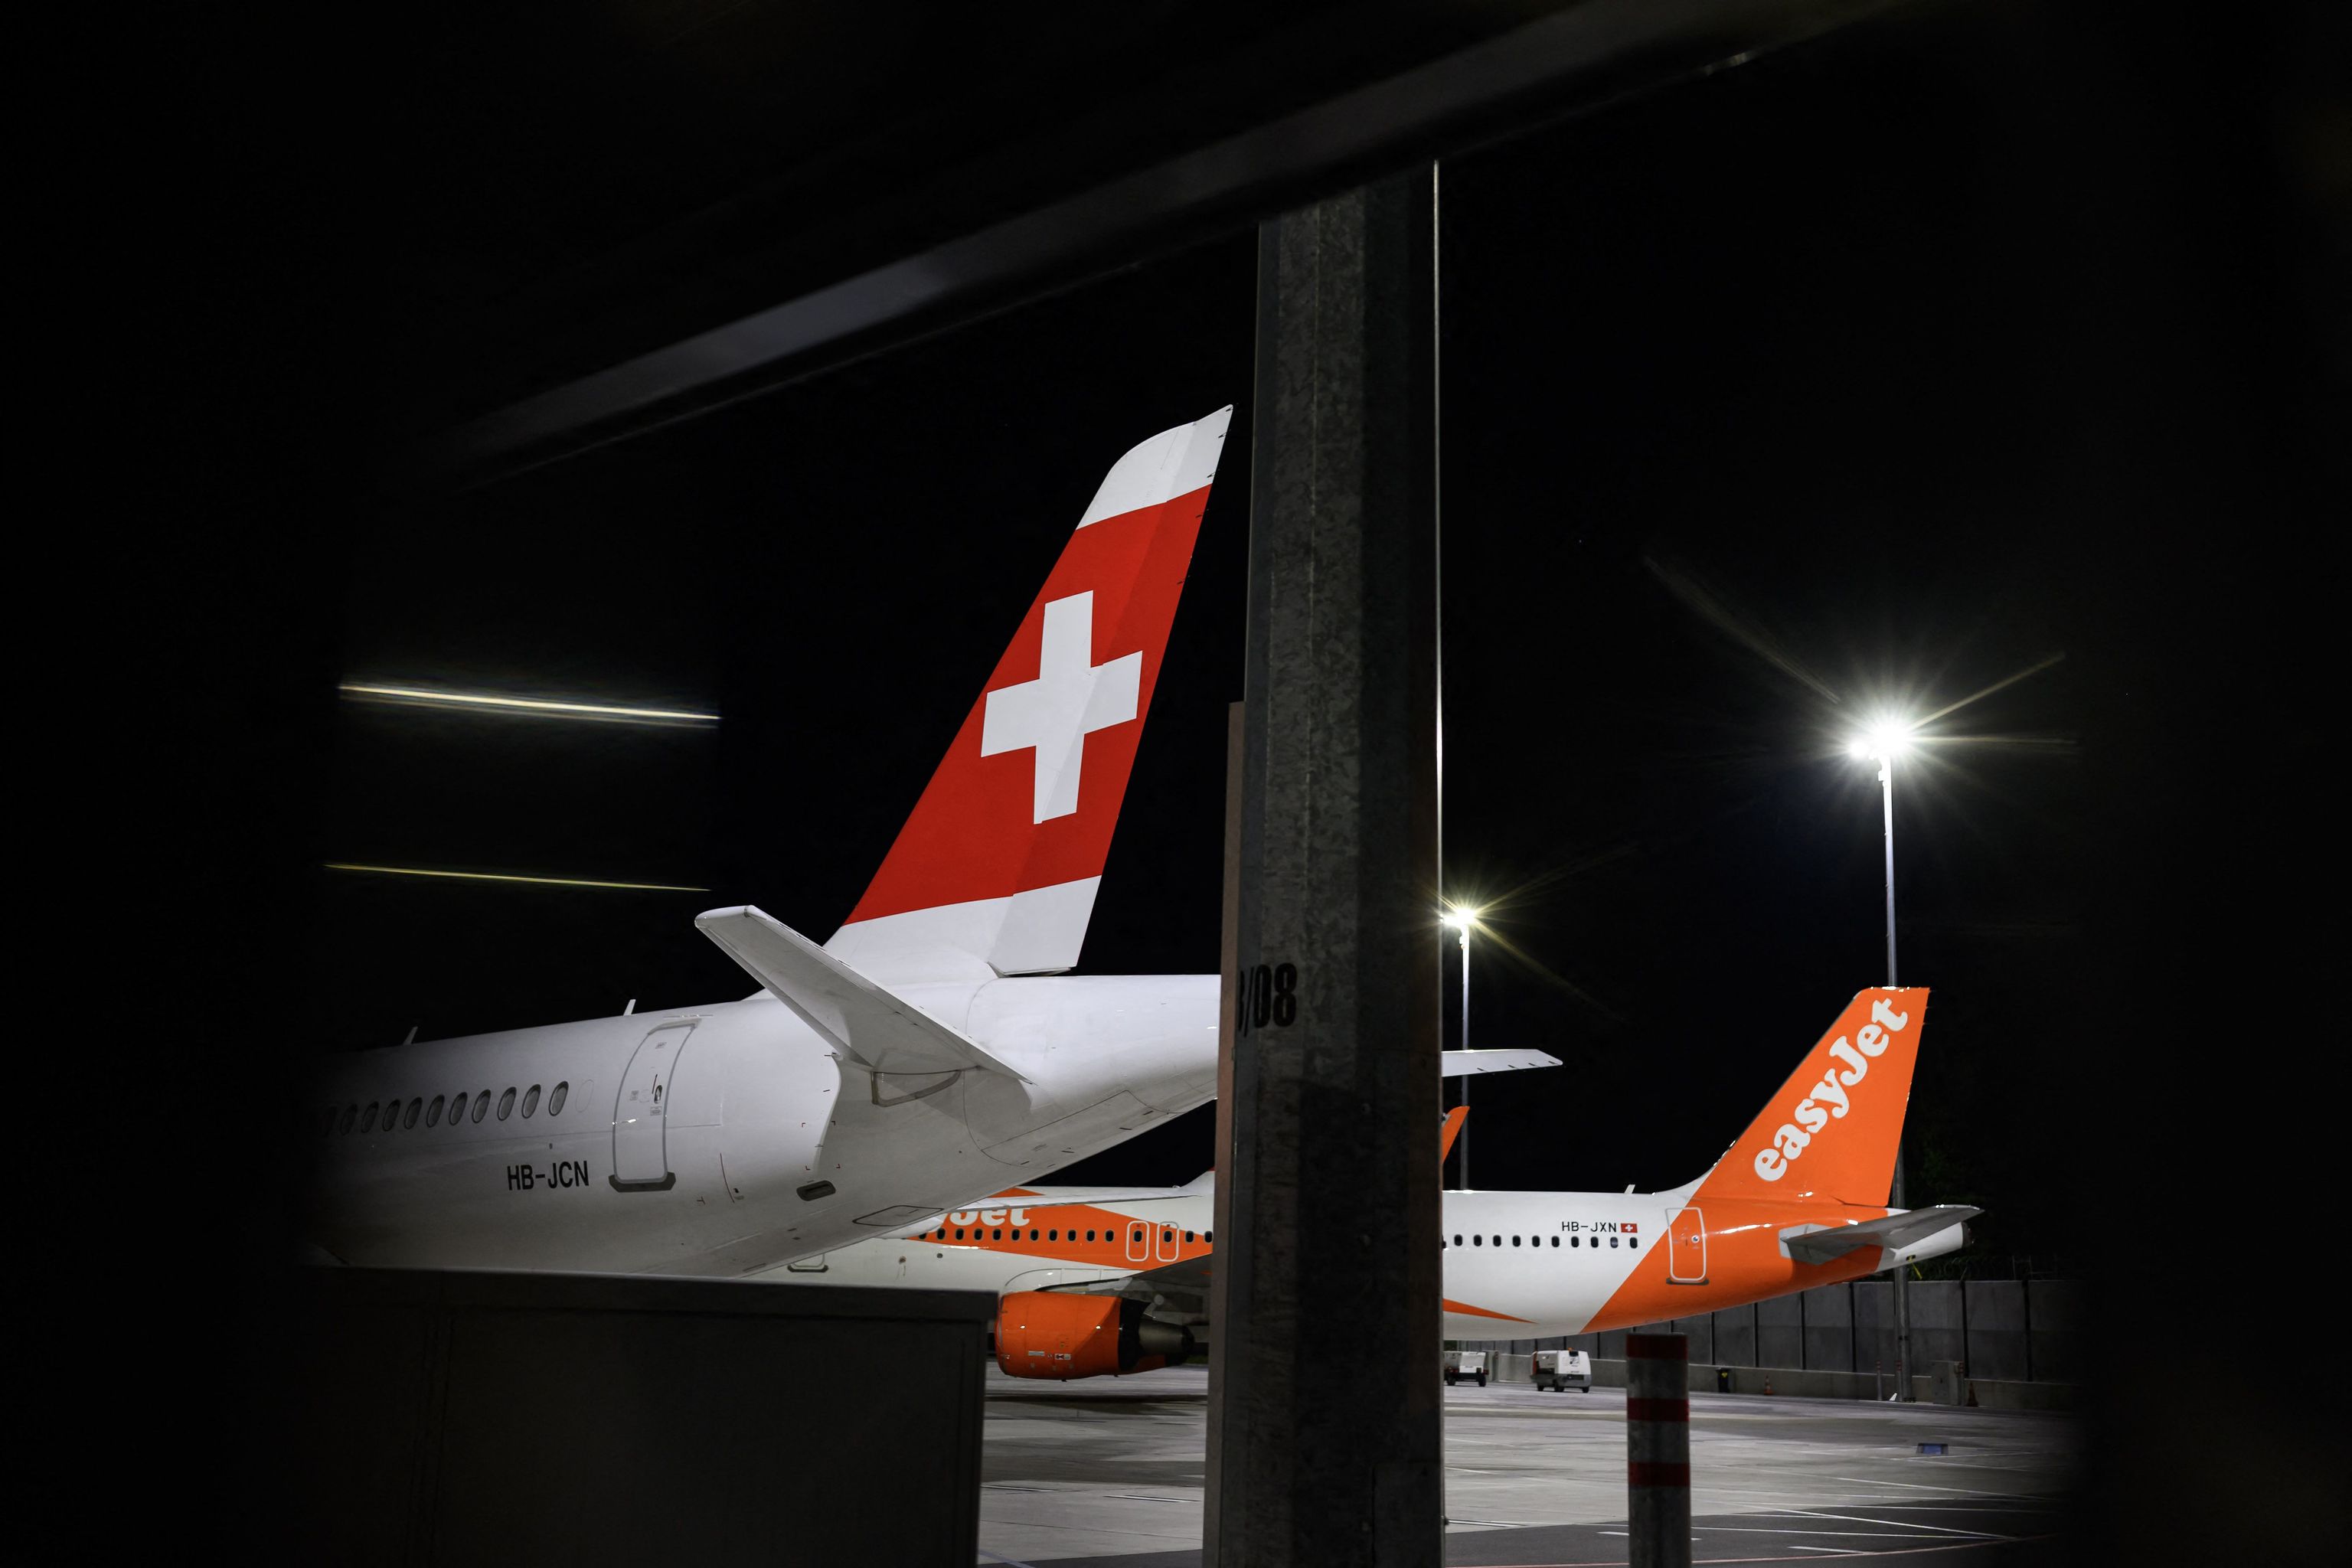 Commercial flights were halted at Geneva airport.